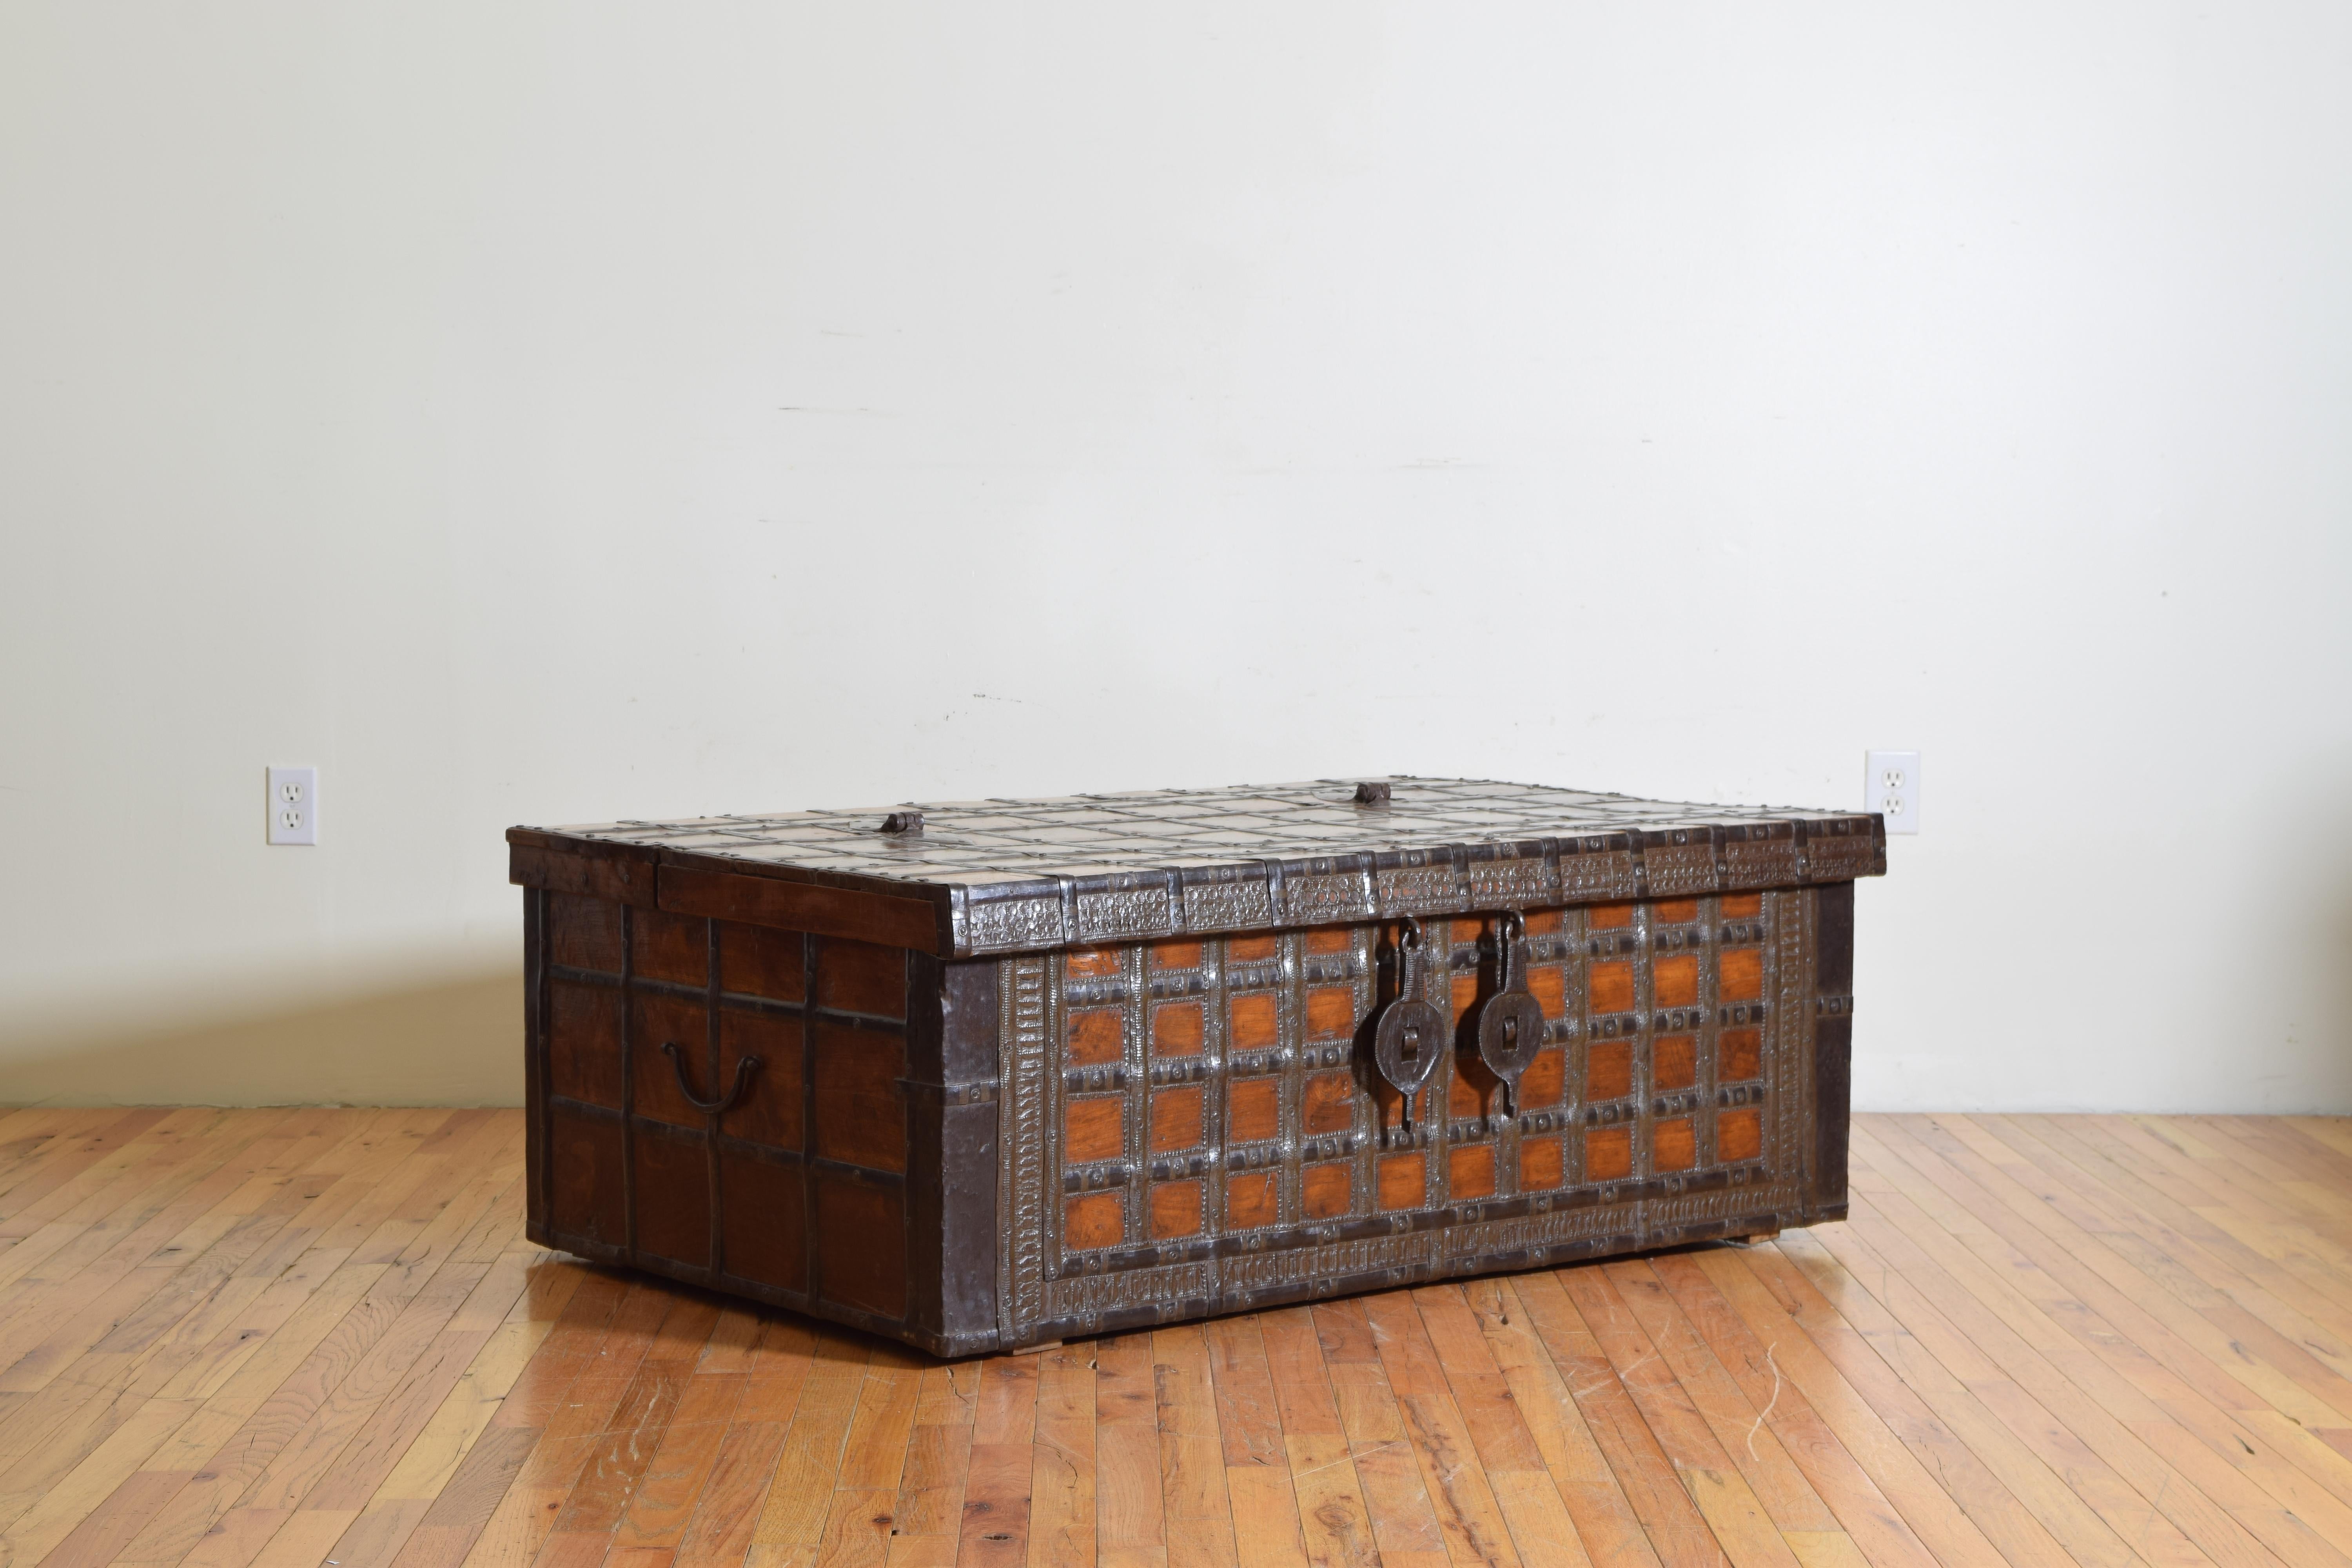 A large 19th century rectangular iron-bound wooden coffer box or Rajasthan trunk from British Colonial India with hinged top hatch.